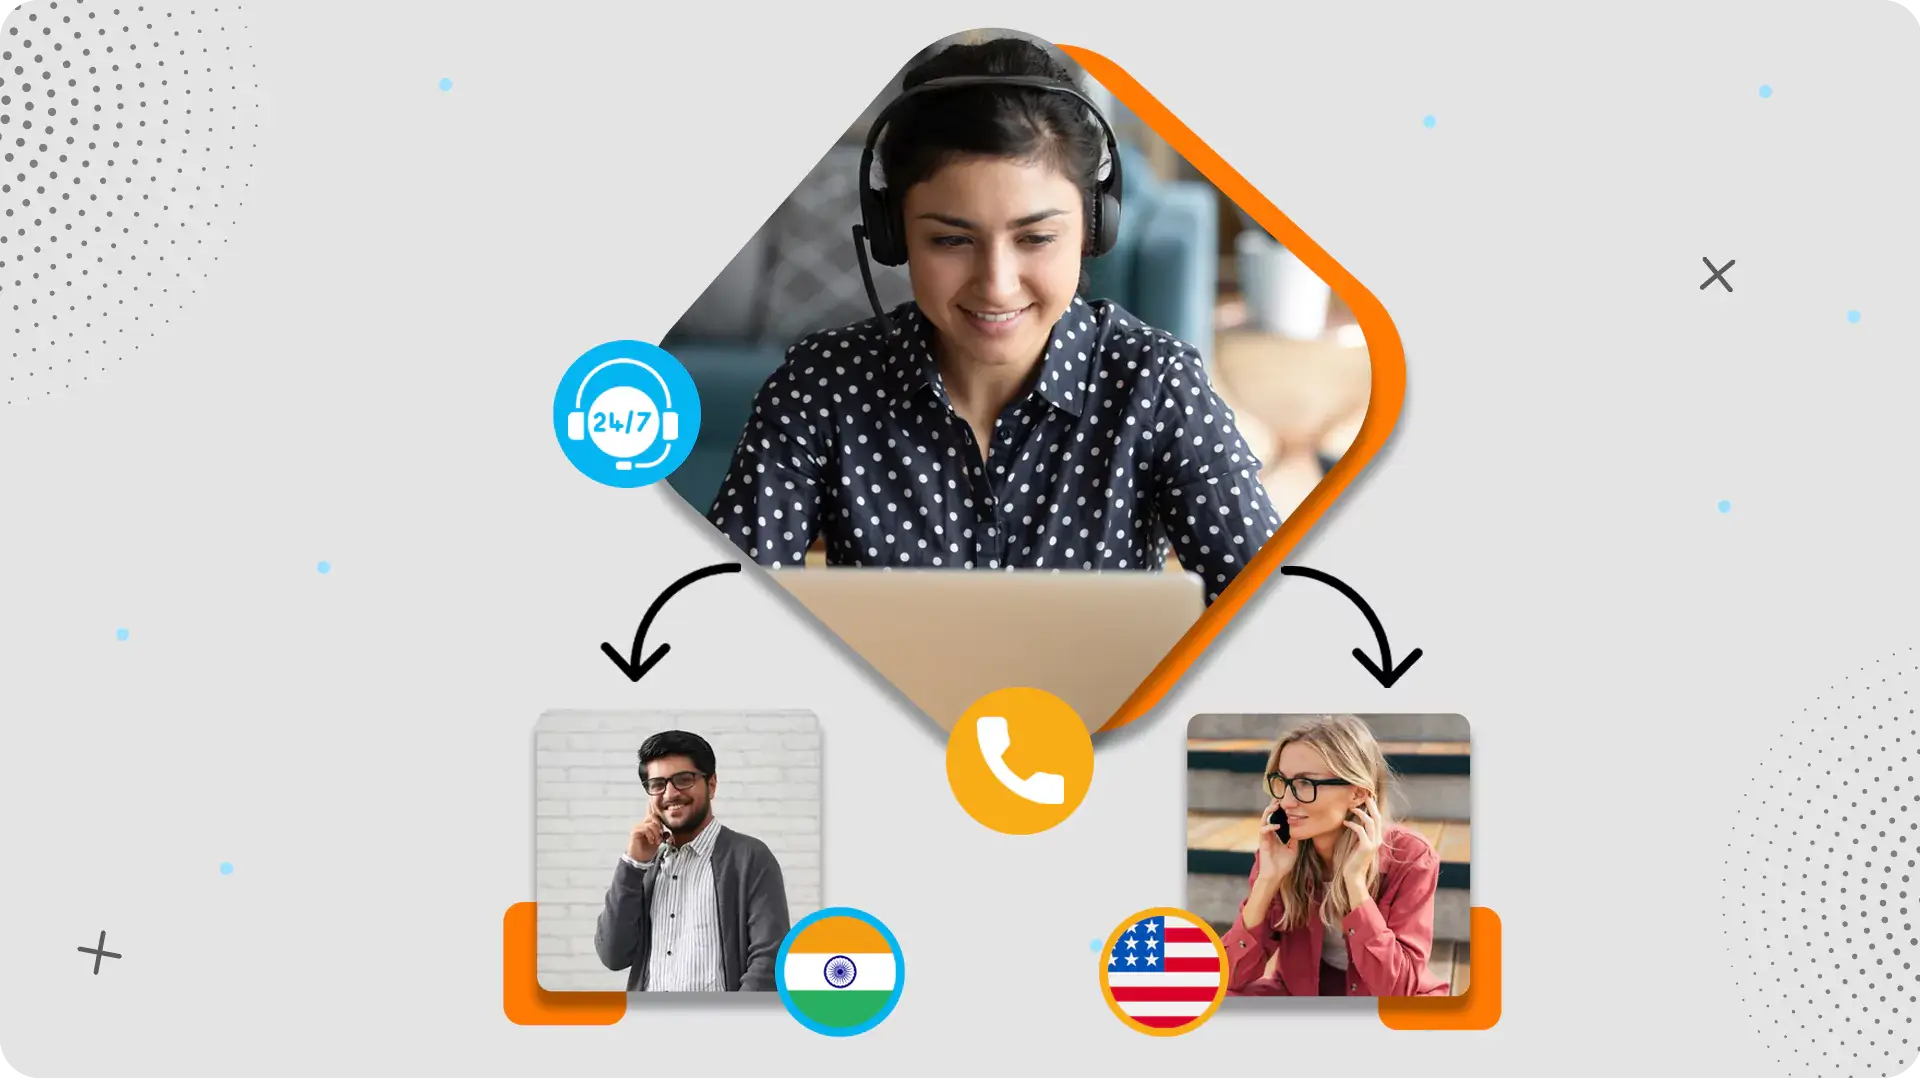 callmama-the-most-affordable-way-to-call-india-from-the-us-64d1ea05272fd